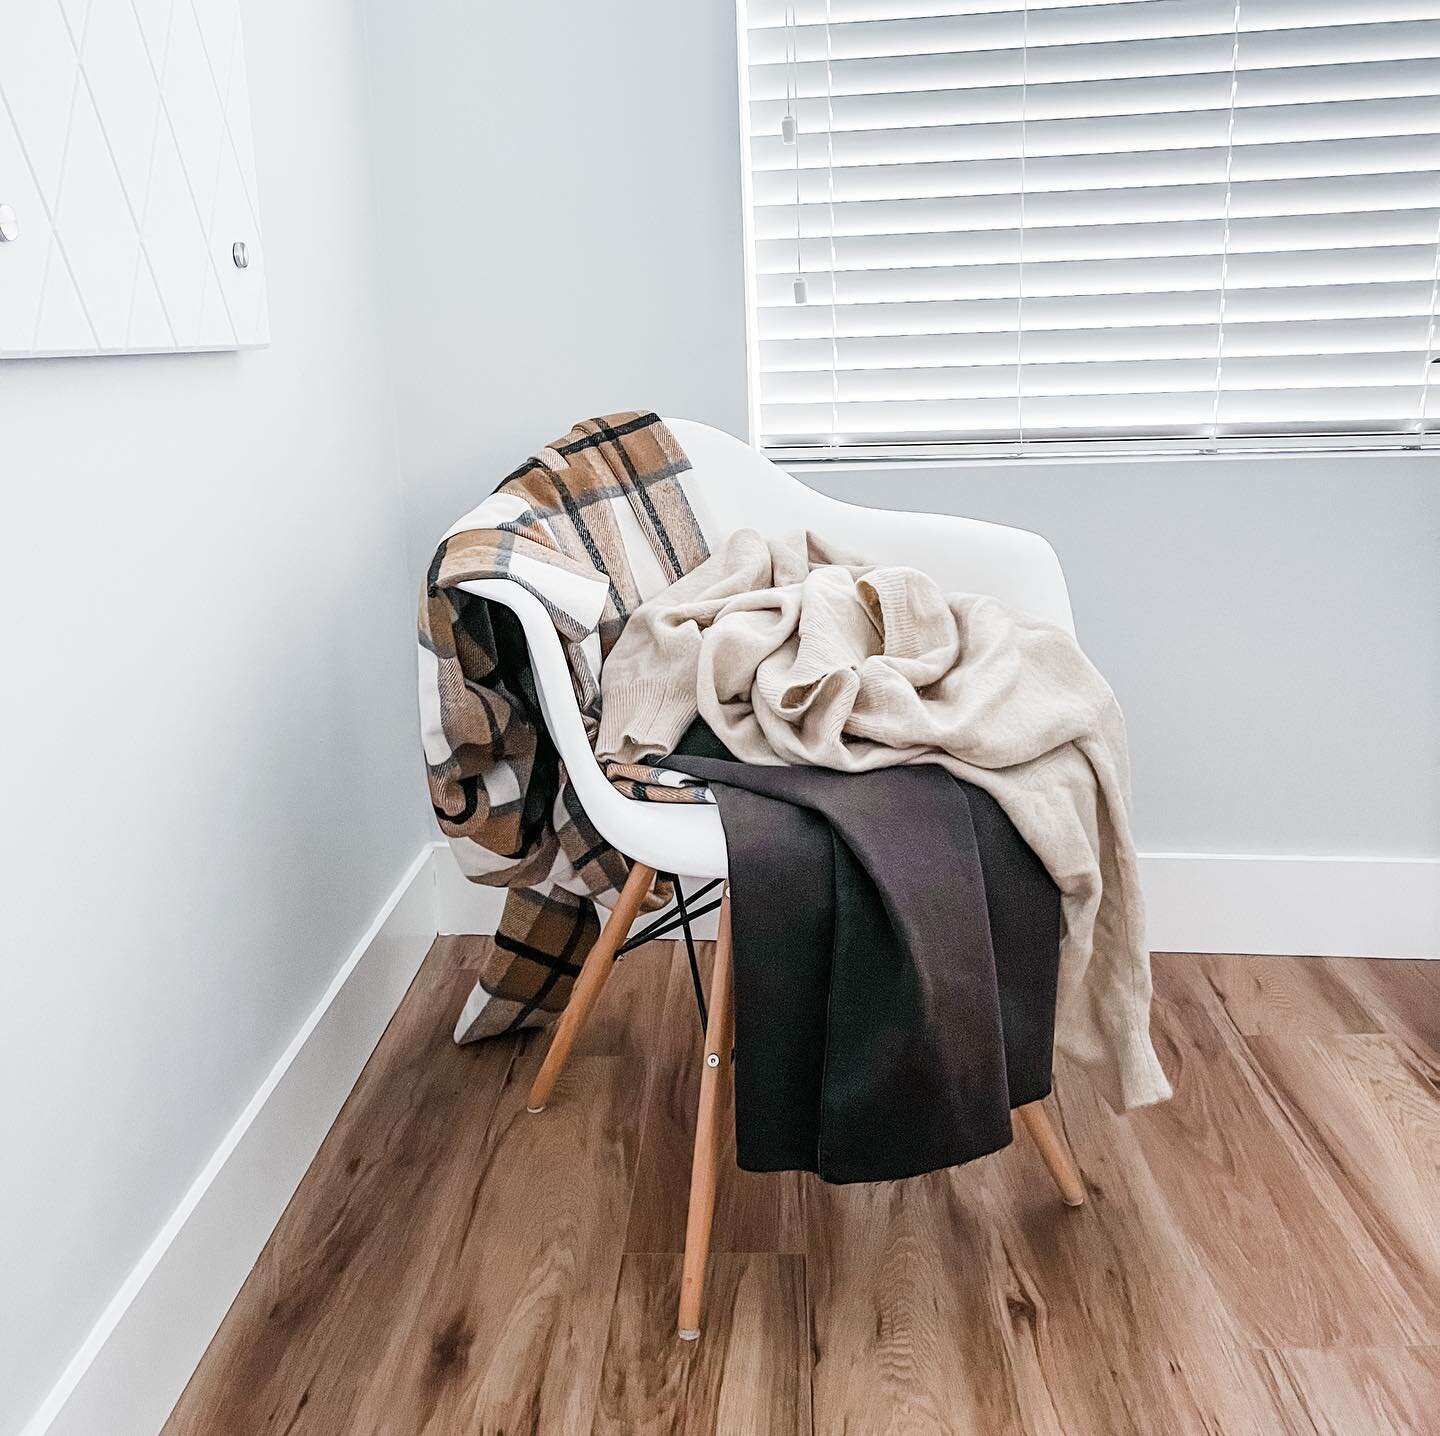 Fold or Toss? 👚 👔 

While there are different personality traits that may predispose some clients to neatly fold their clothes and some to toss their clothes, we like to think that the majority of our clients toss their cloths in an effort to get o